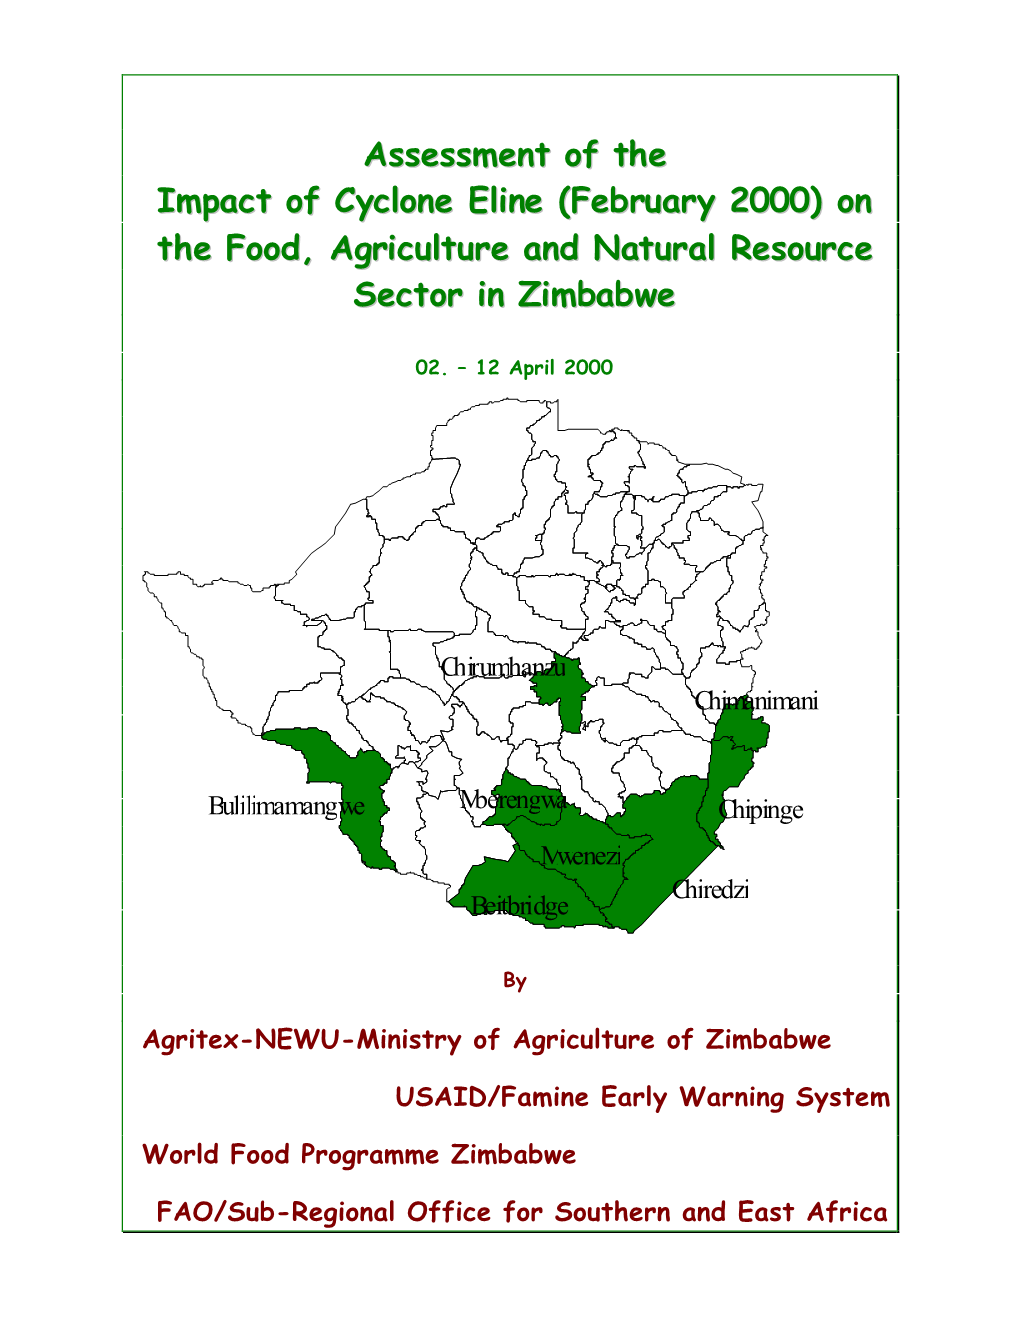 Assessment of the Impact of Cyclone Eline (February 2000) on the Food, Agriculture and Natural Resource Sector in Zimbabwe